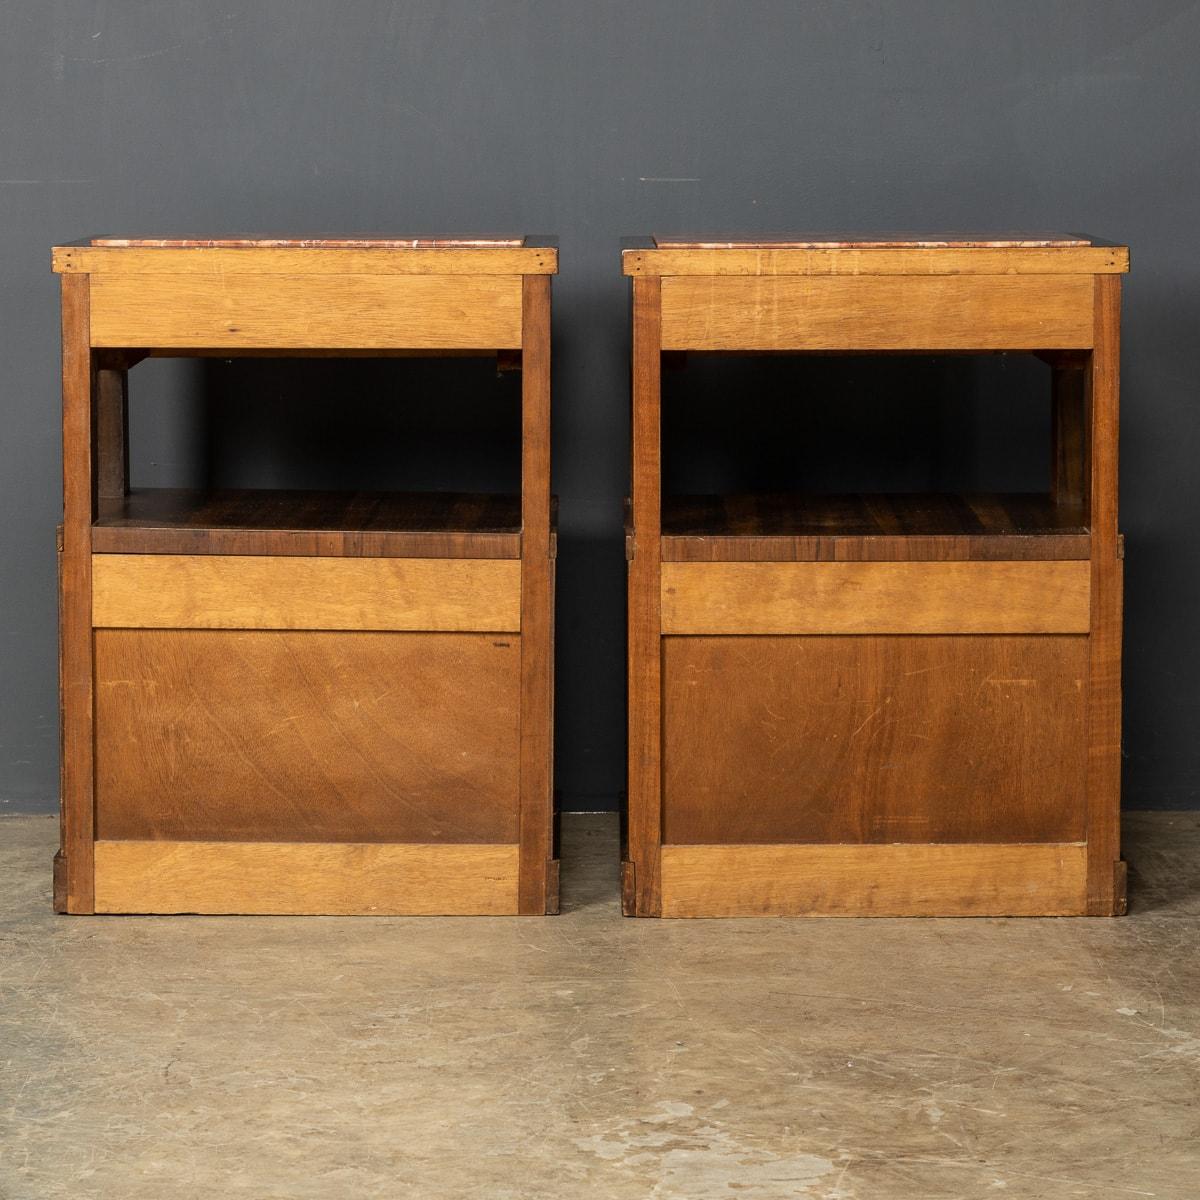 20th Century Italian Pair of Kingwood & Marble Bedside Cabinets, C.1950 For Sale 3